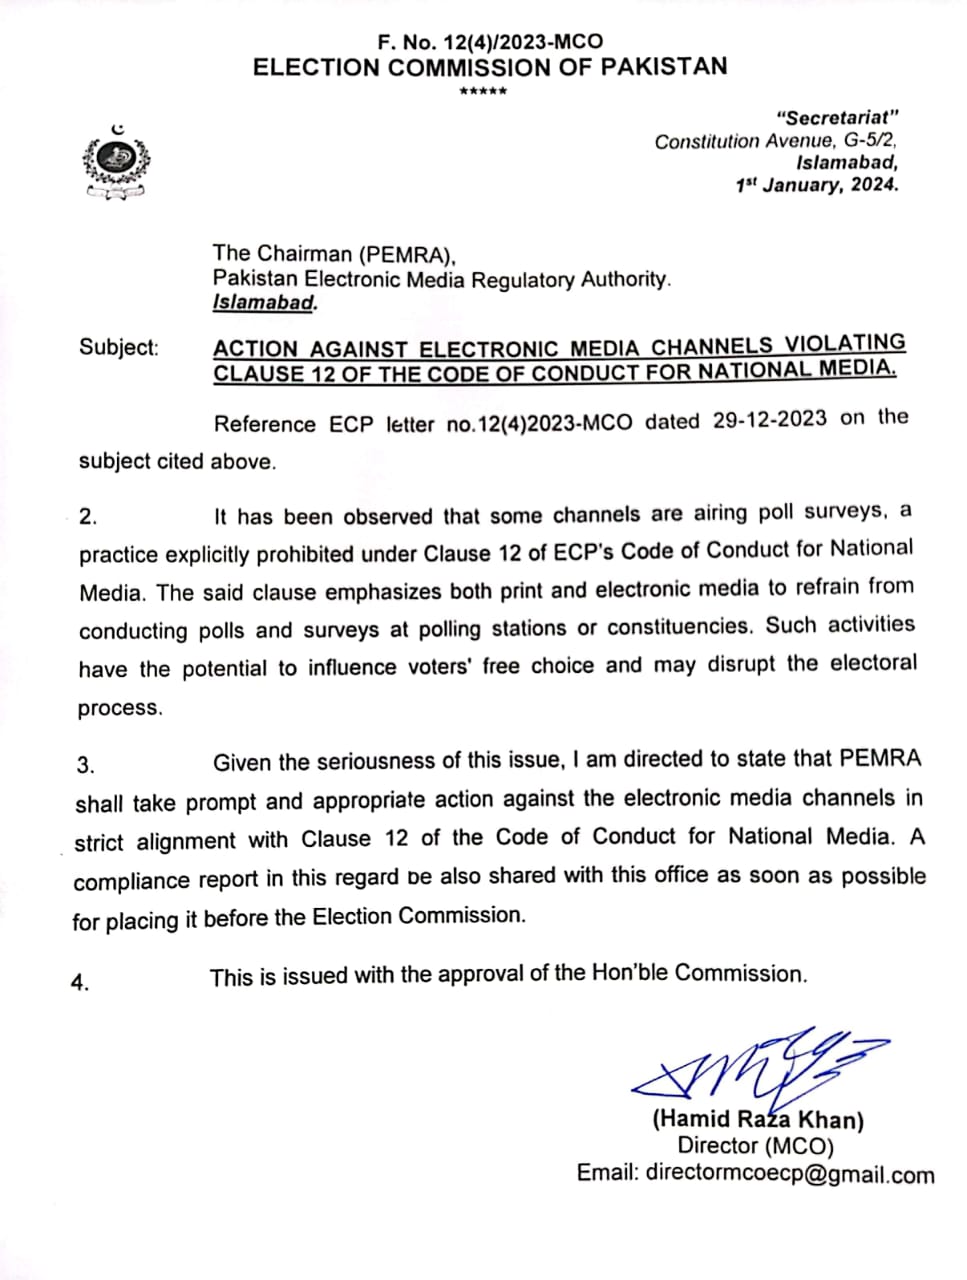 ecp letter to pemra